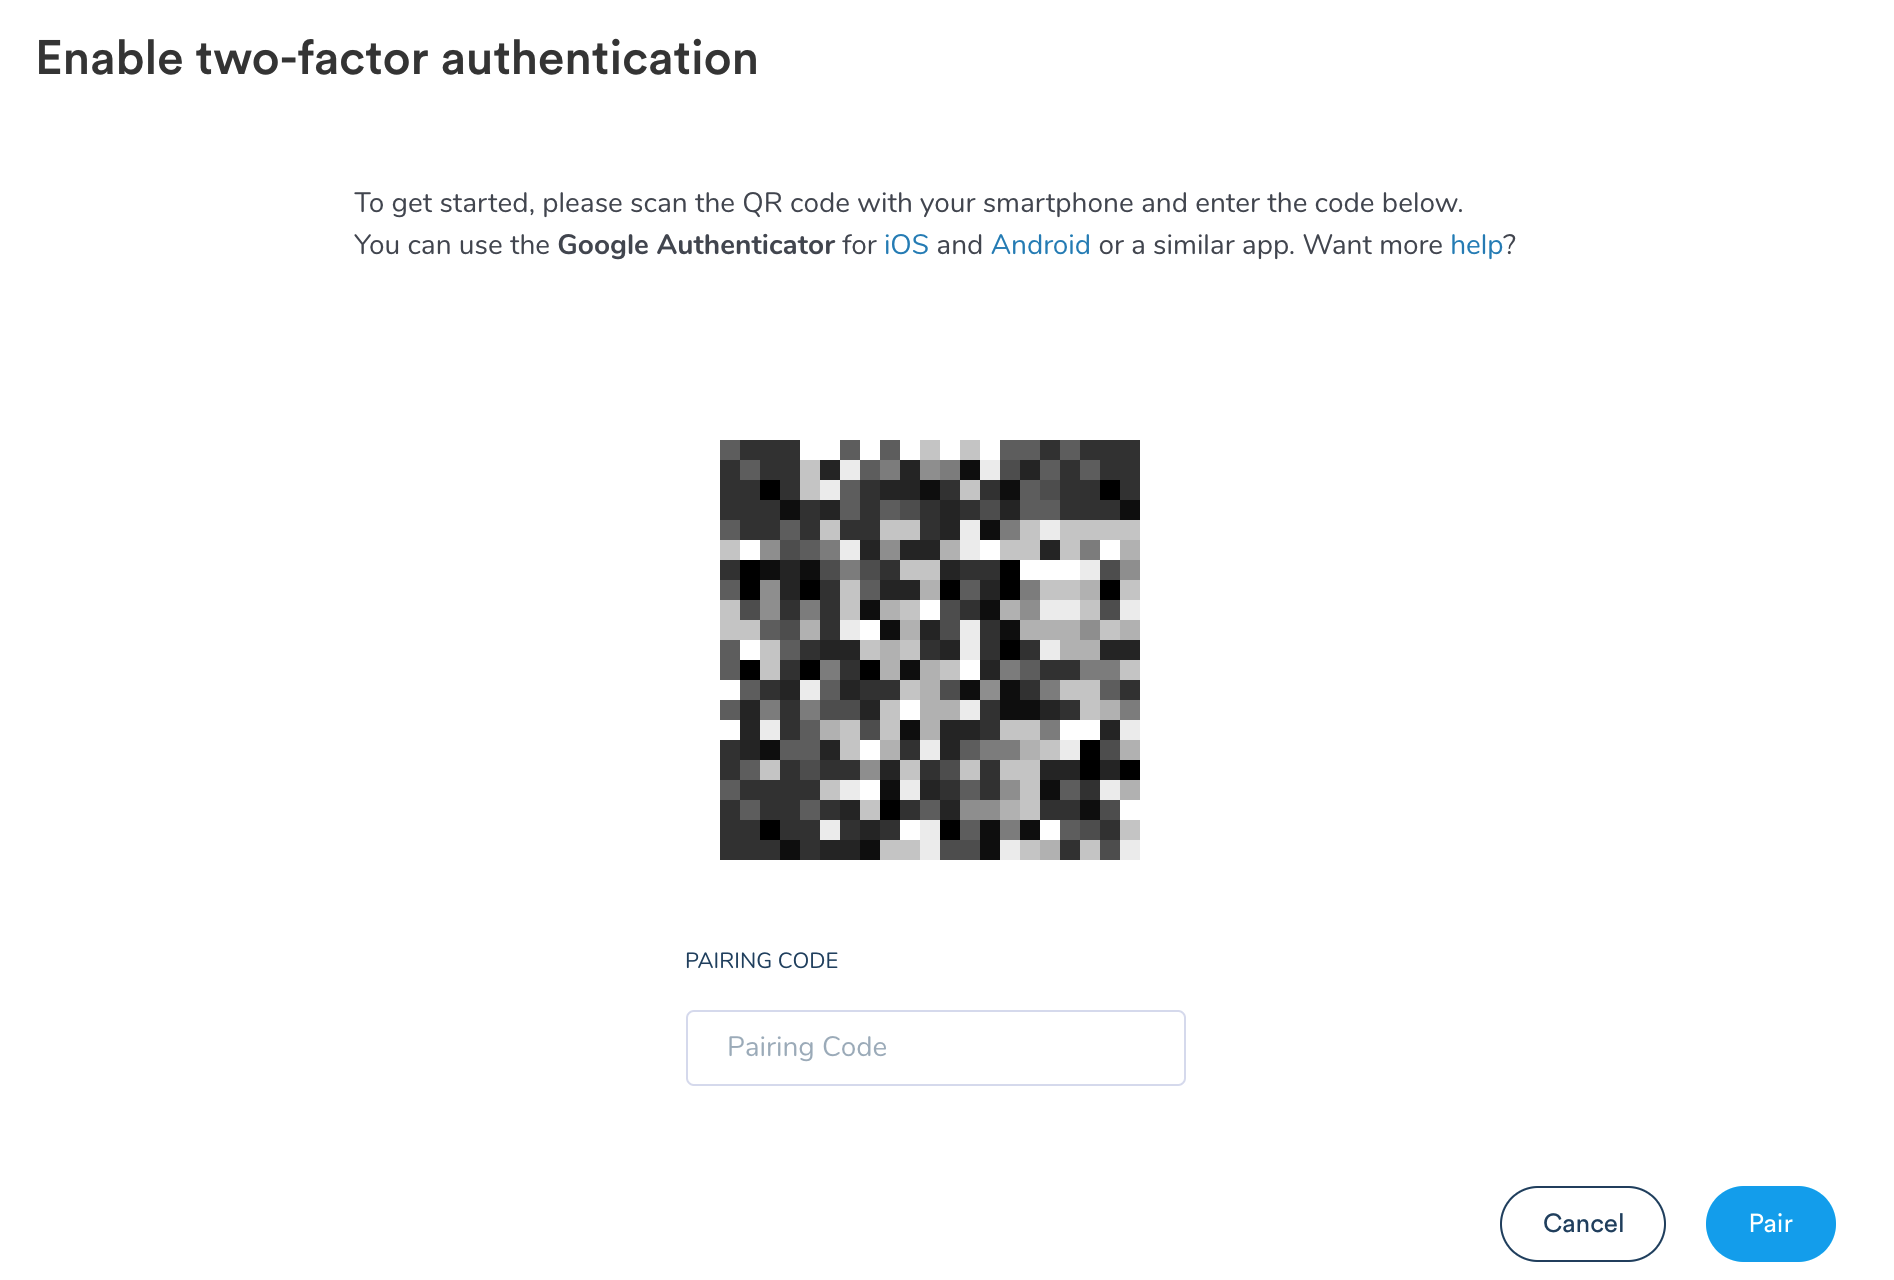 Two-factor authentication pairing